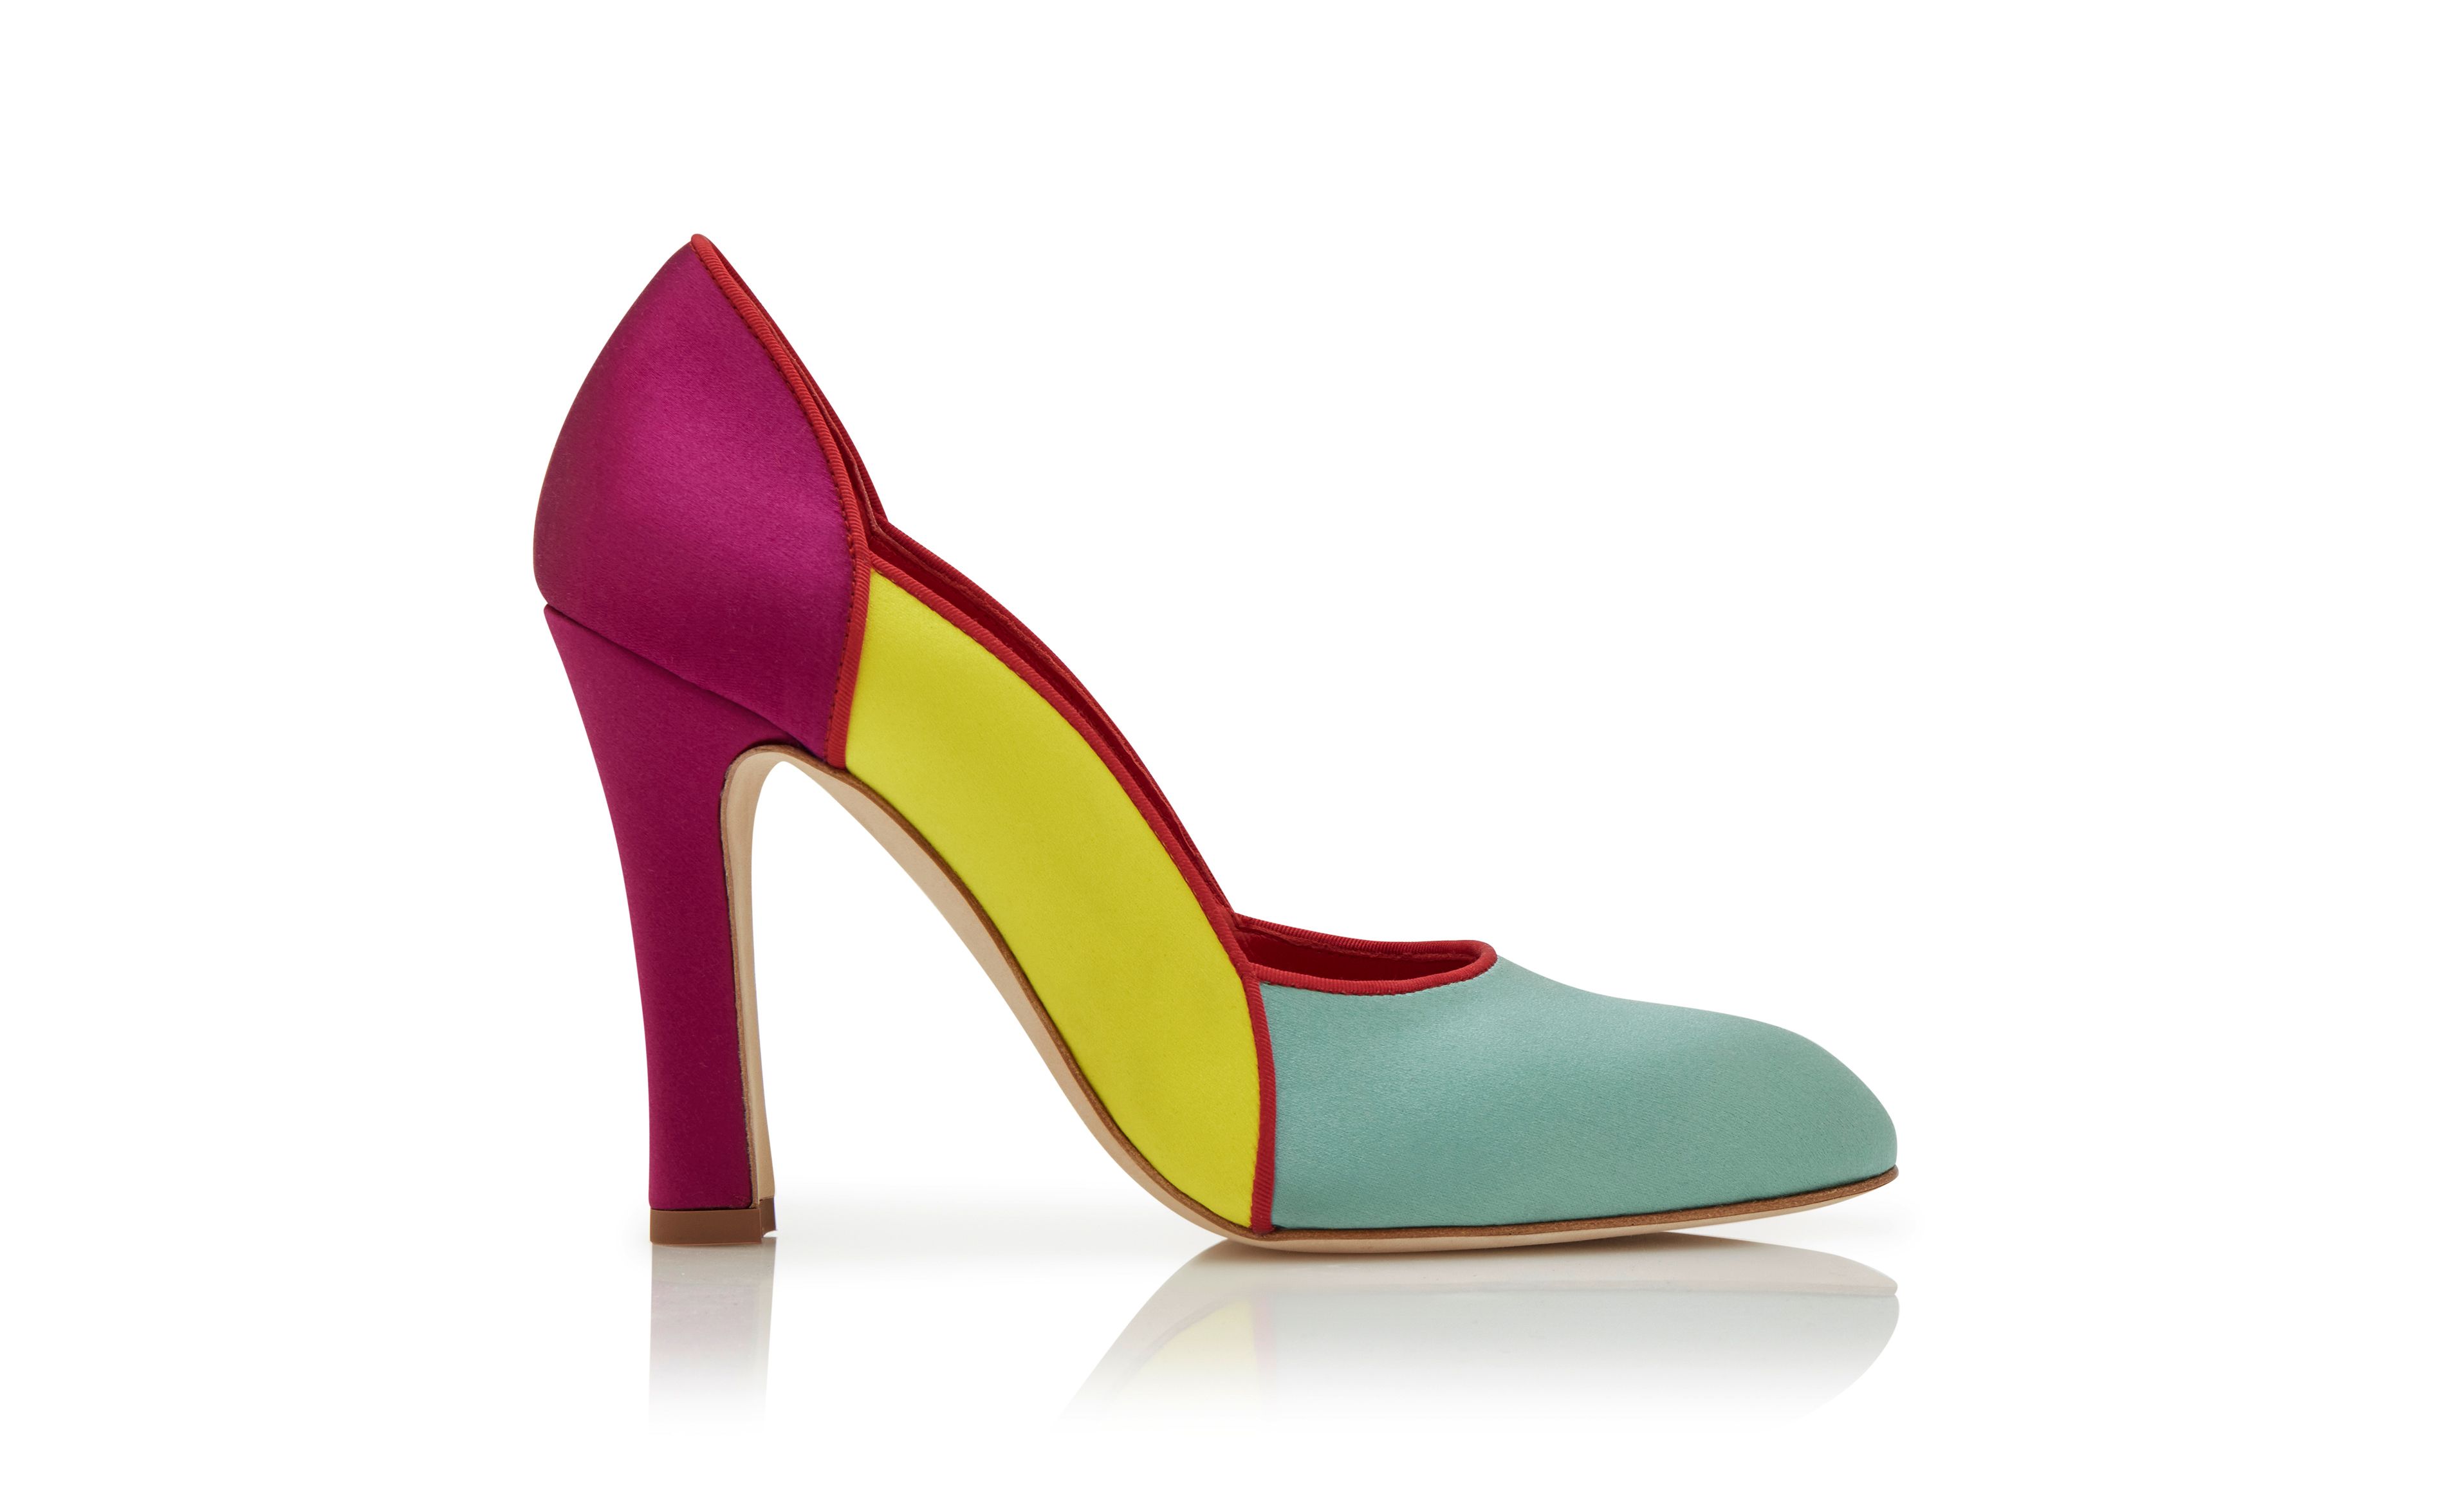 Designer Teal, Yellow and Pink Satin Scalloped Pumps - Image Side View